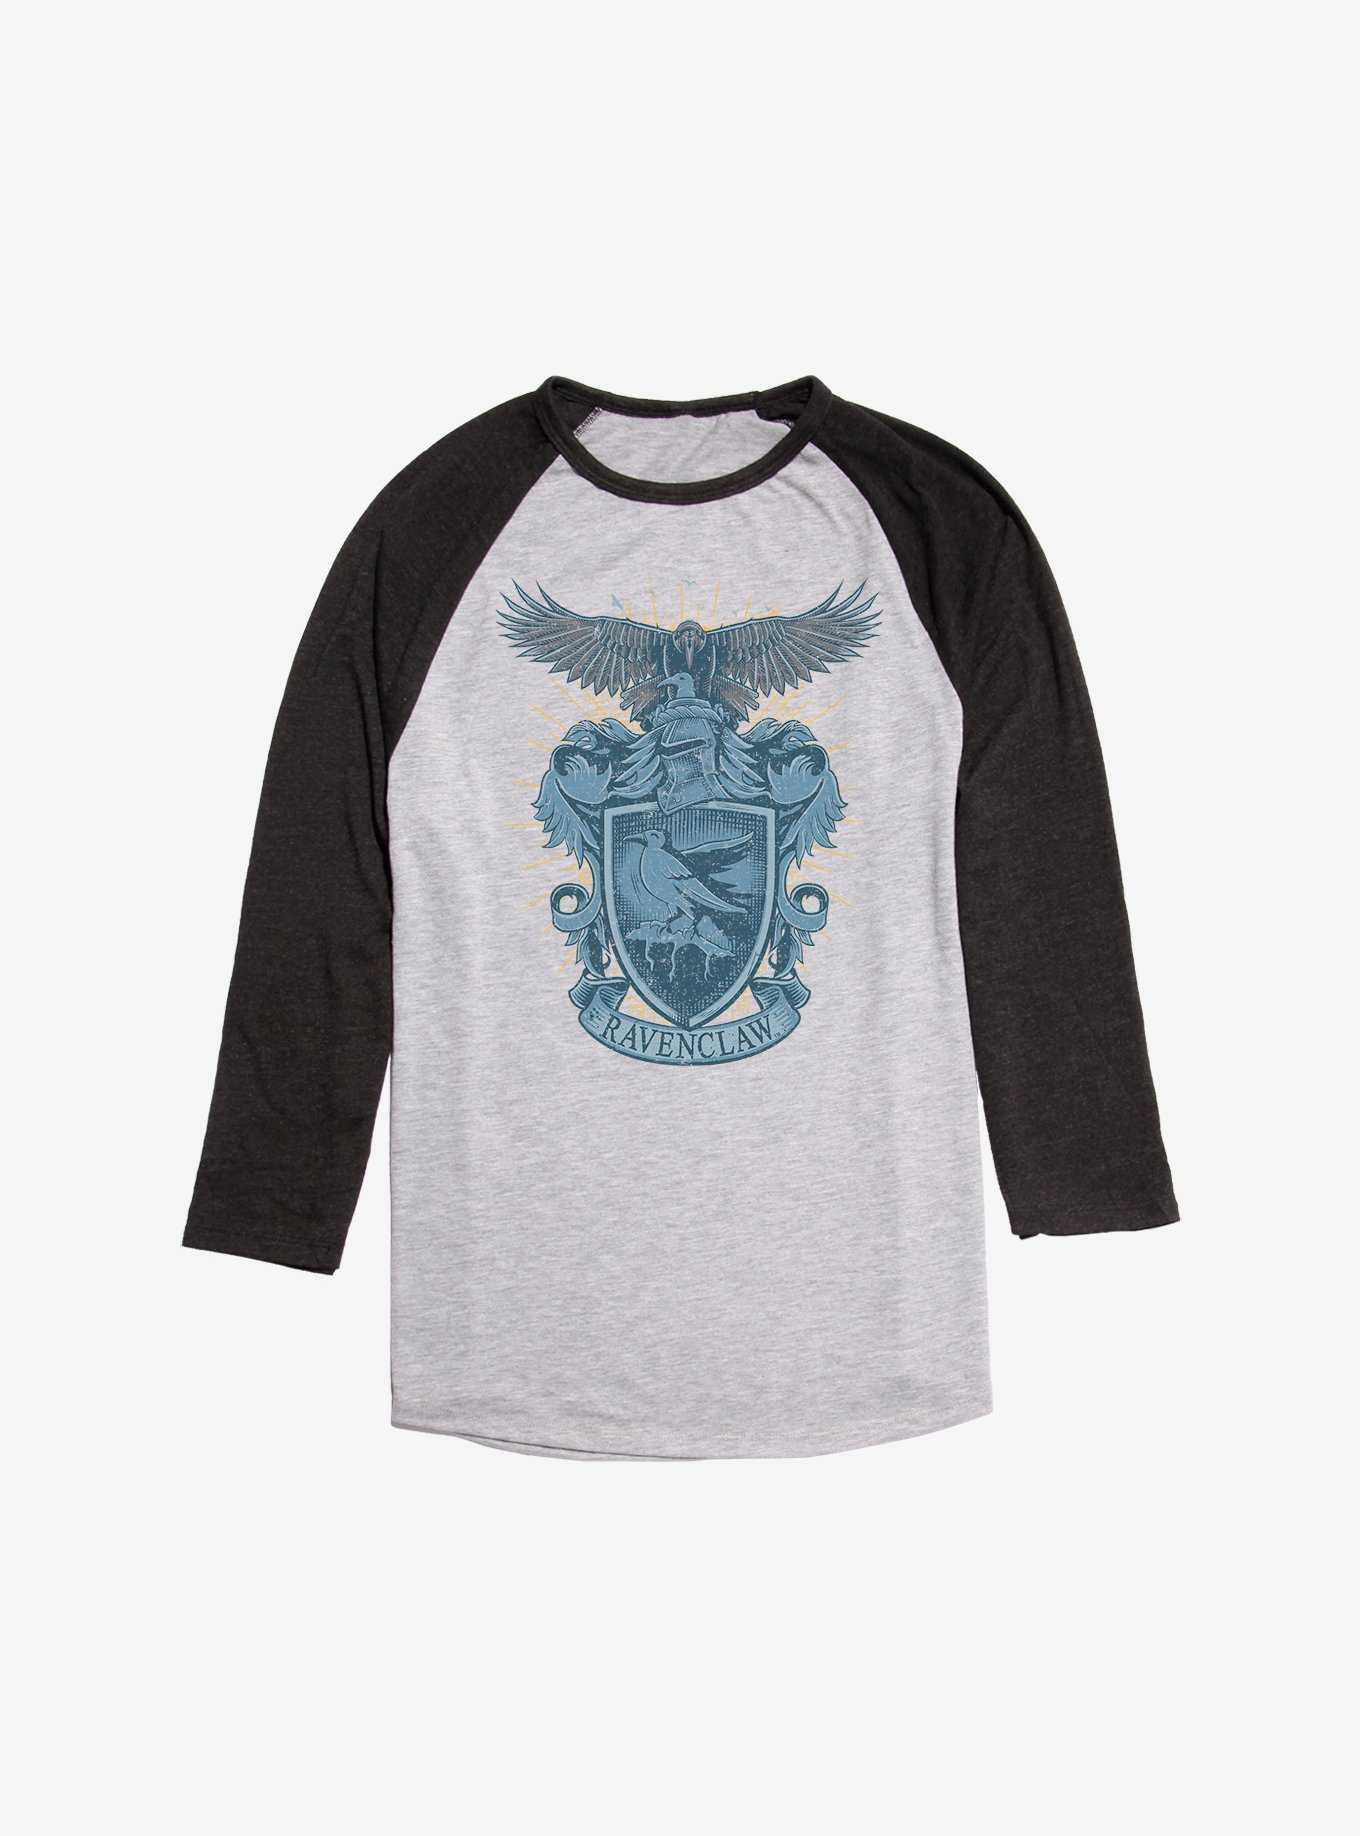 OFFICIAL Harry & T-Shirts, Potter BoxLunch Merch Sweaters Ravenclaw 